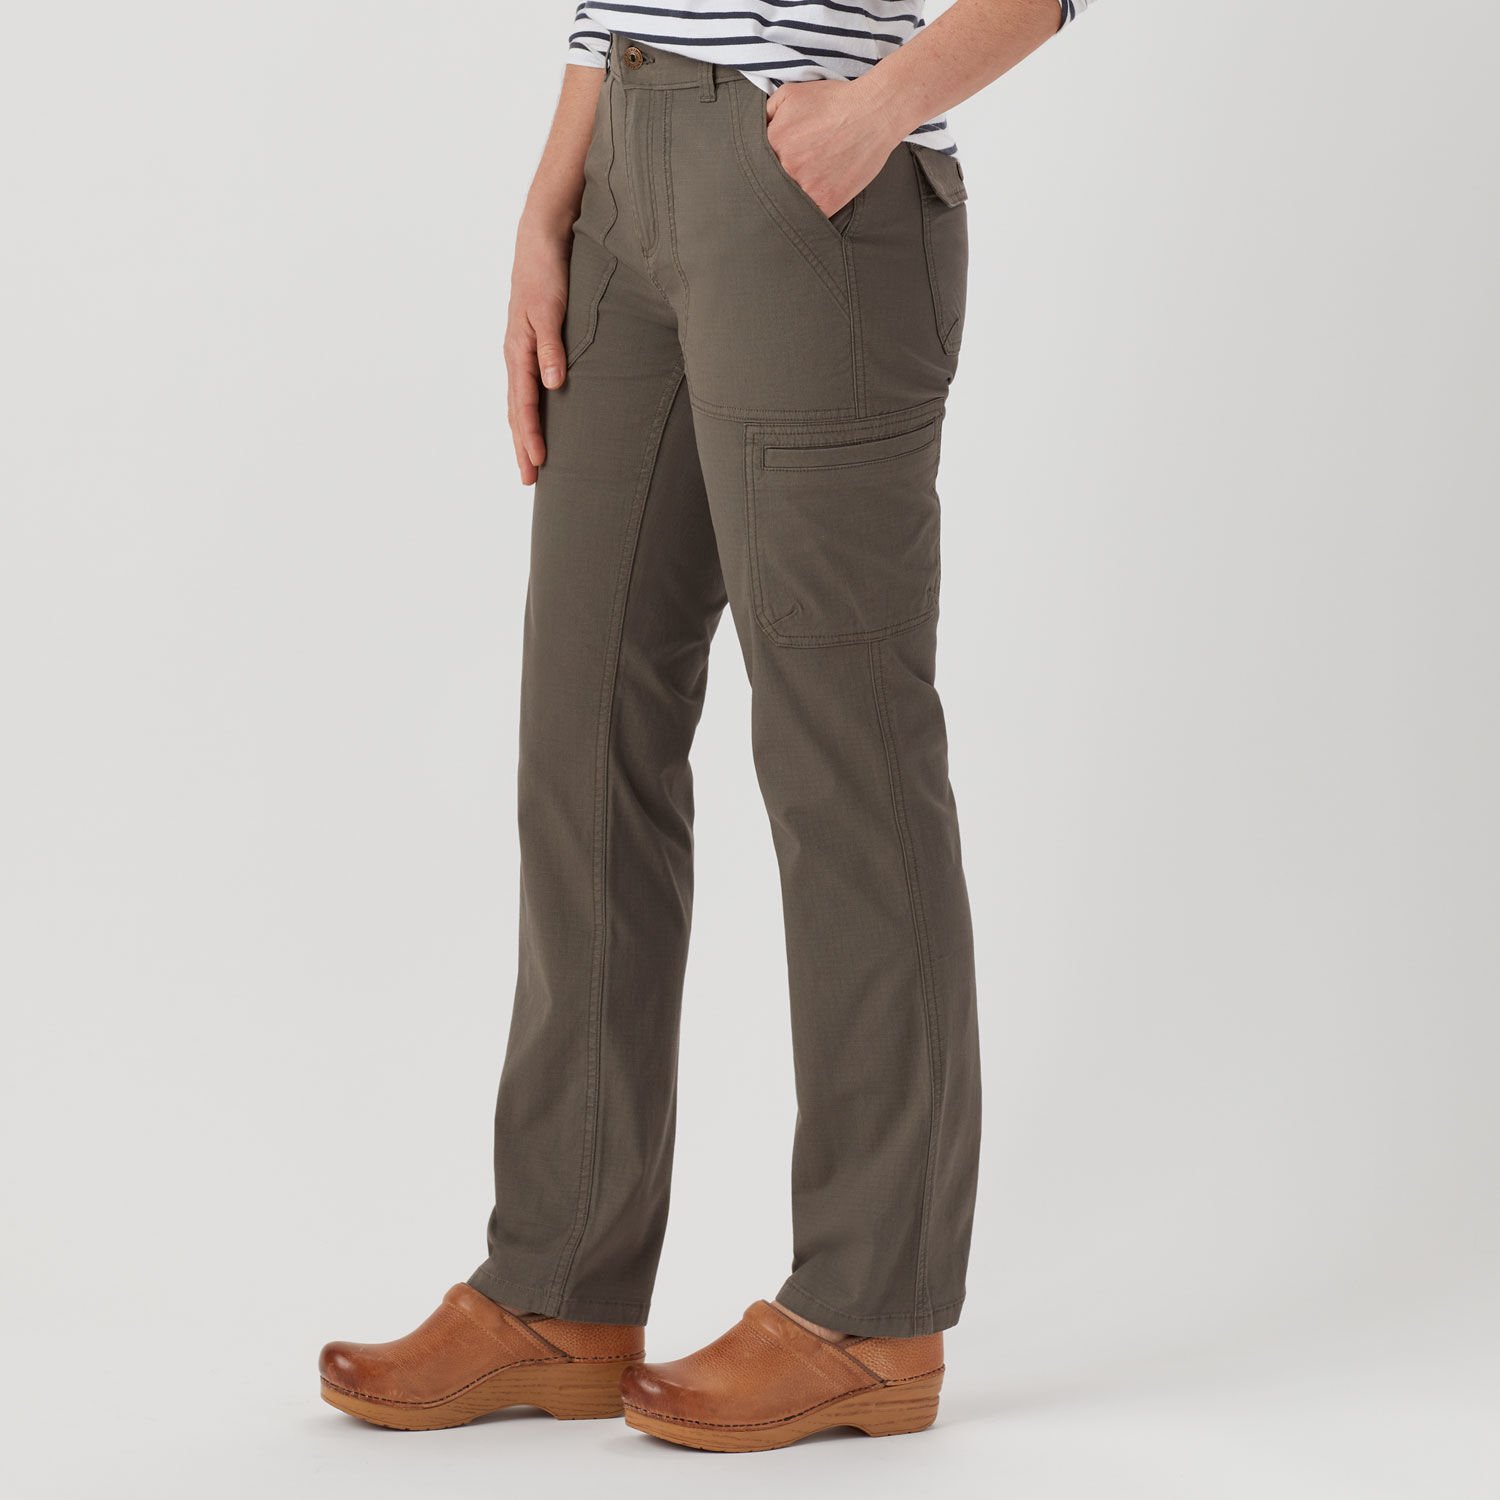 Duluth Trading Cos Fire Hose Briar Pants  OutdoorHub